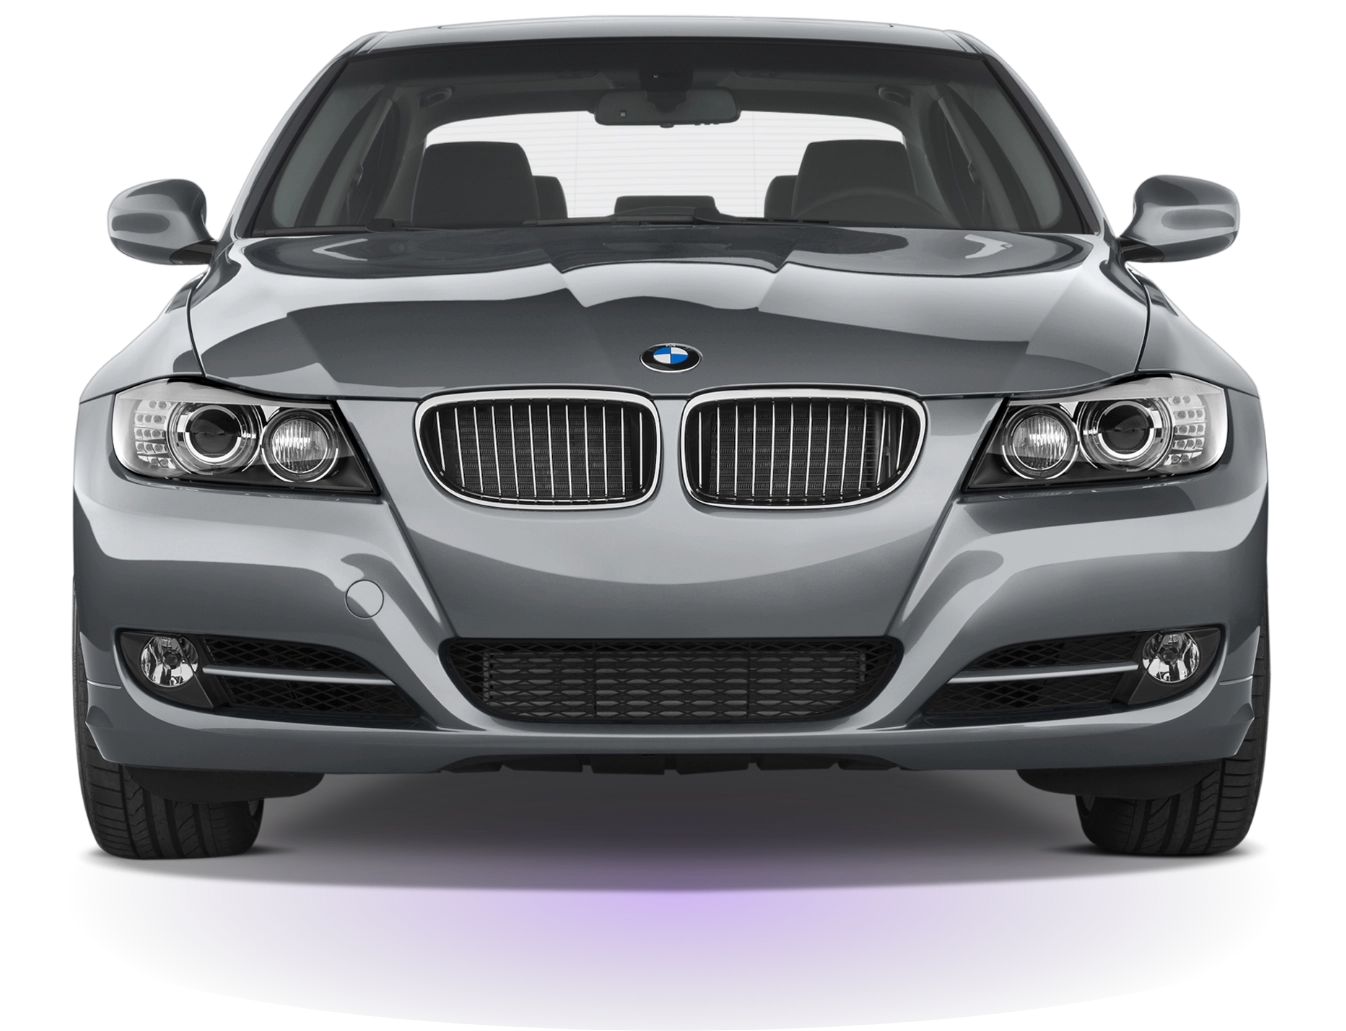 BMW repair and services Rockville MD